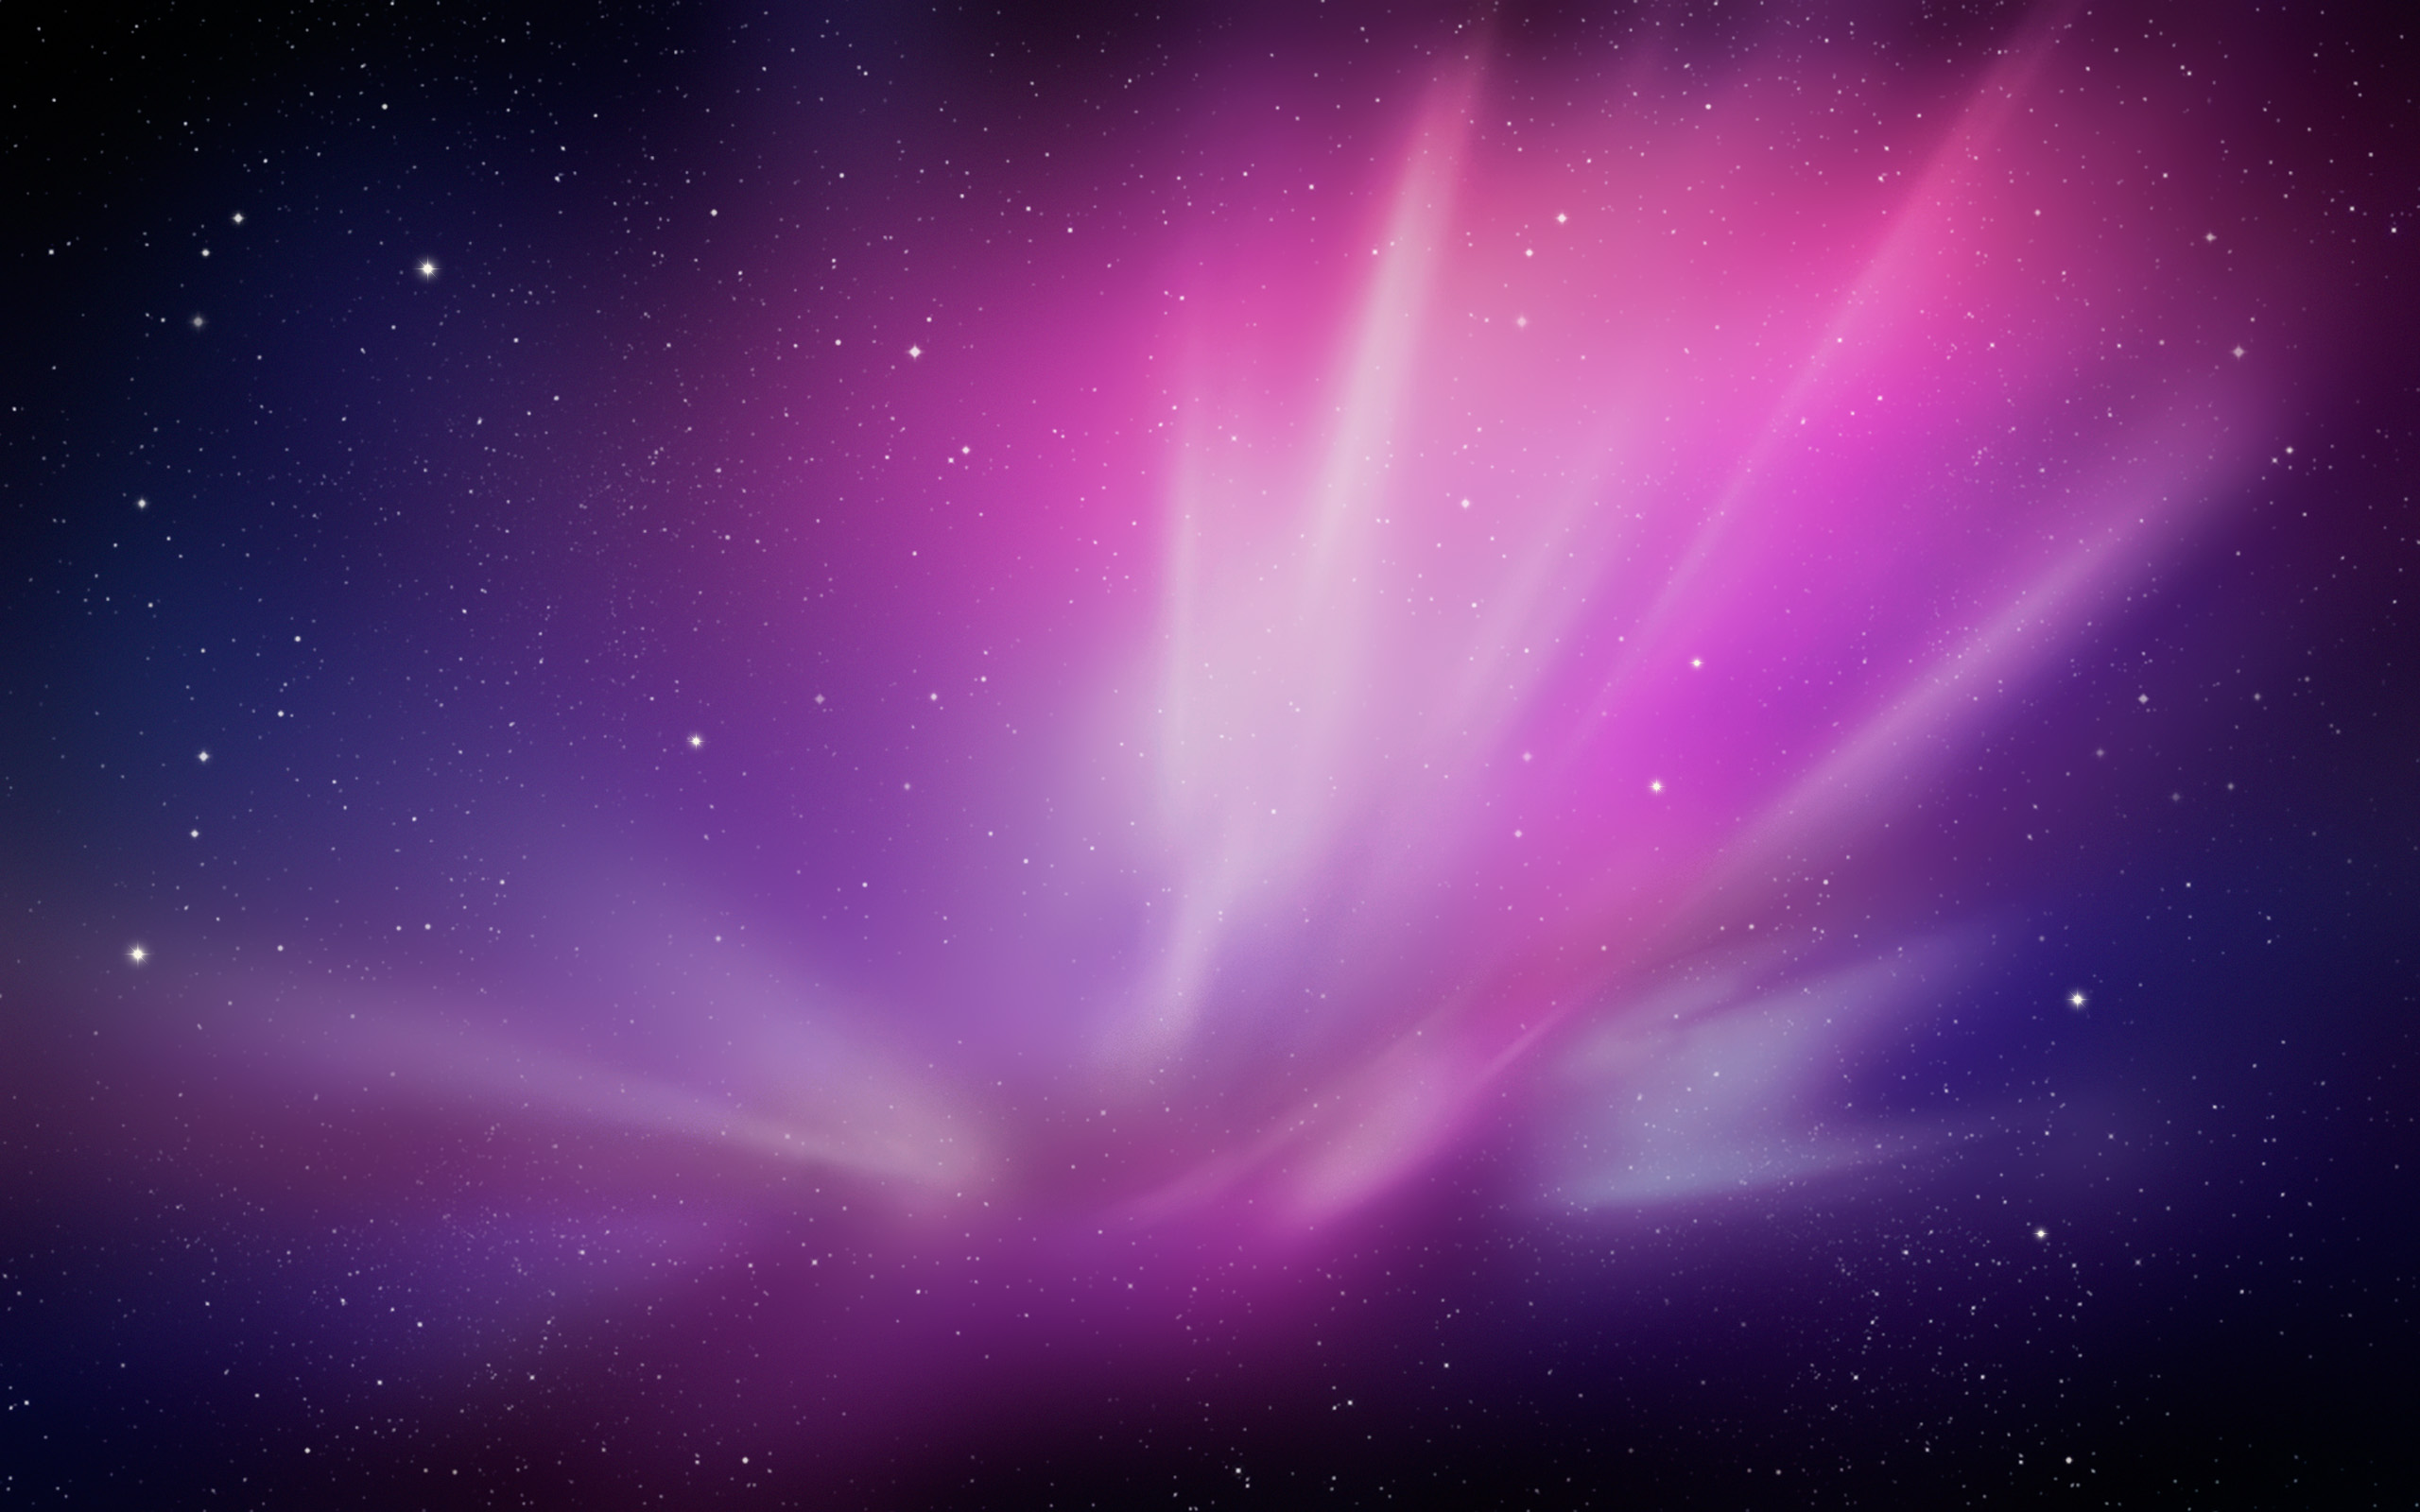 Apple computer backgrounds